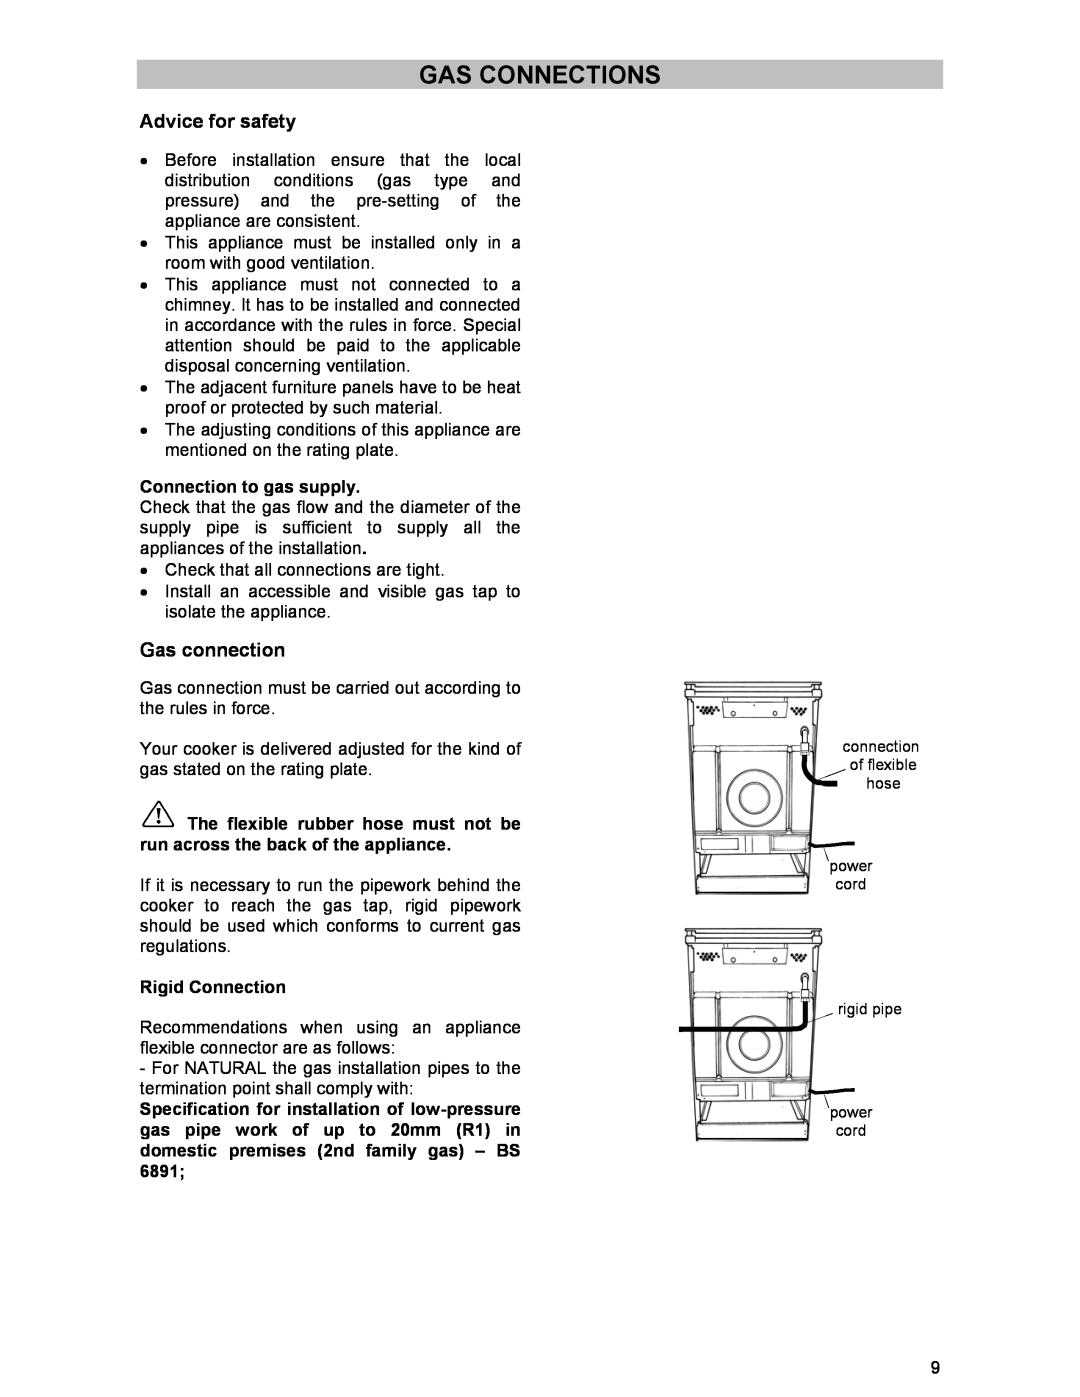 Electrolux DSO51DF manual Gas Connections, Advice for safety, Gas connection 